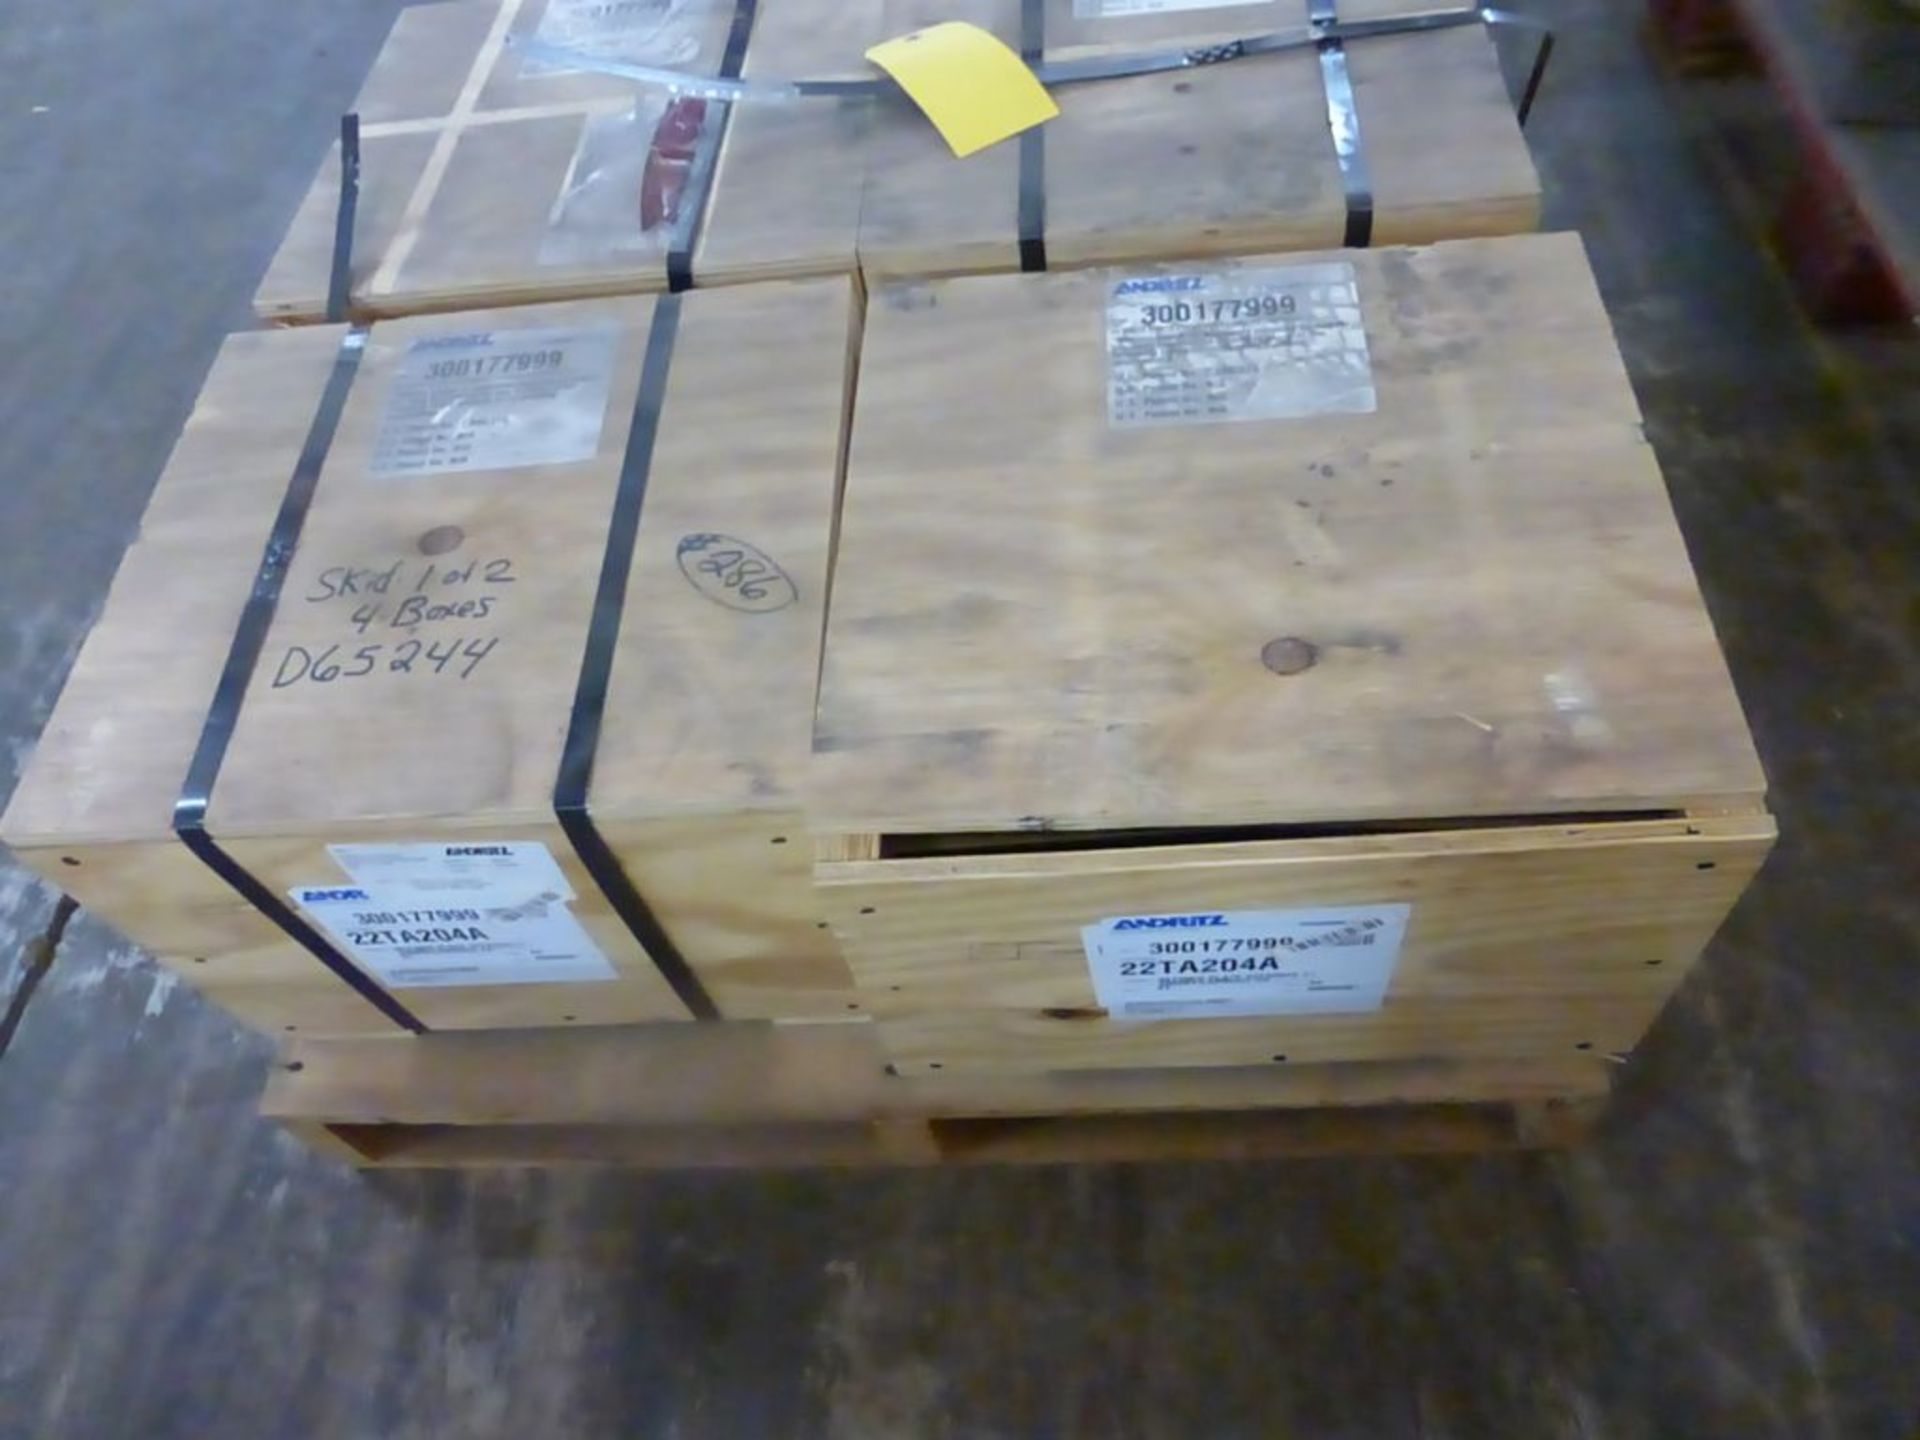 Lot of (2) Sets of Andritz Refiner Plates | Part No. 300177999 - Image 2 of 11